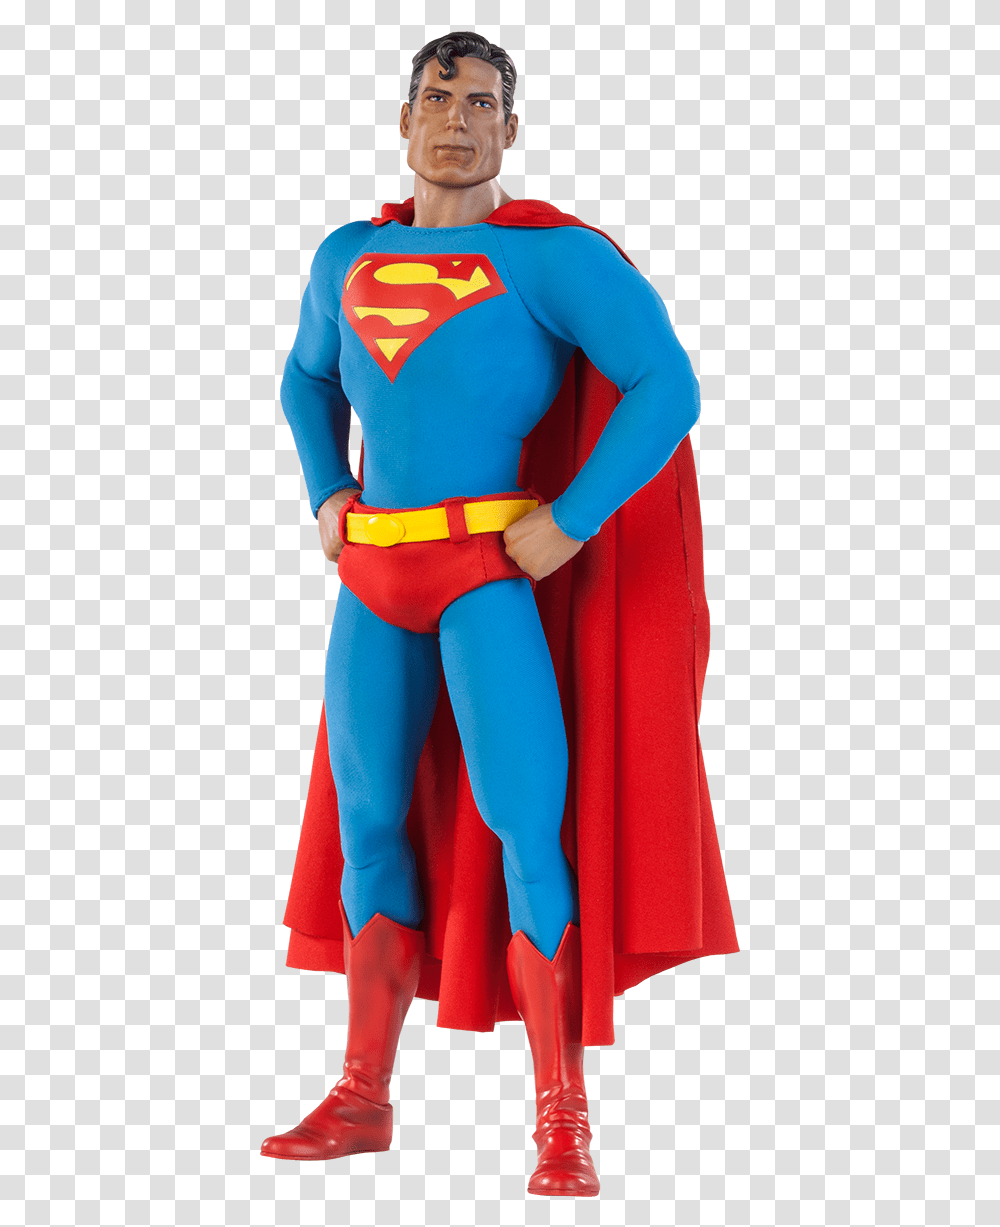 Sideshow Collectibles Sideshow Superman, Cape, Clothing, Apparel, Figurine Transparent Png